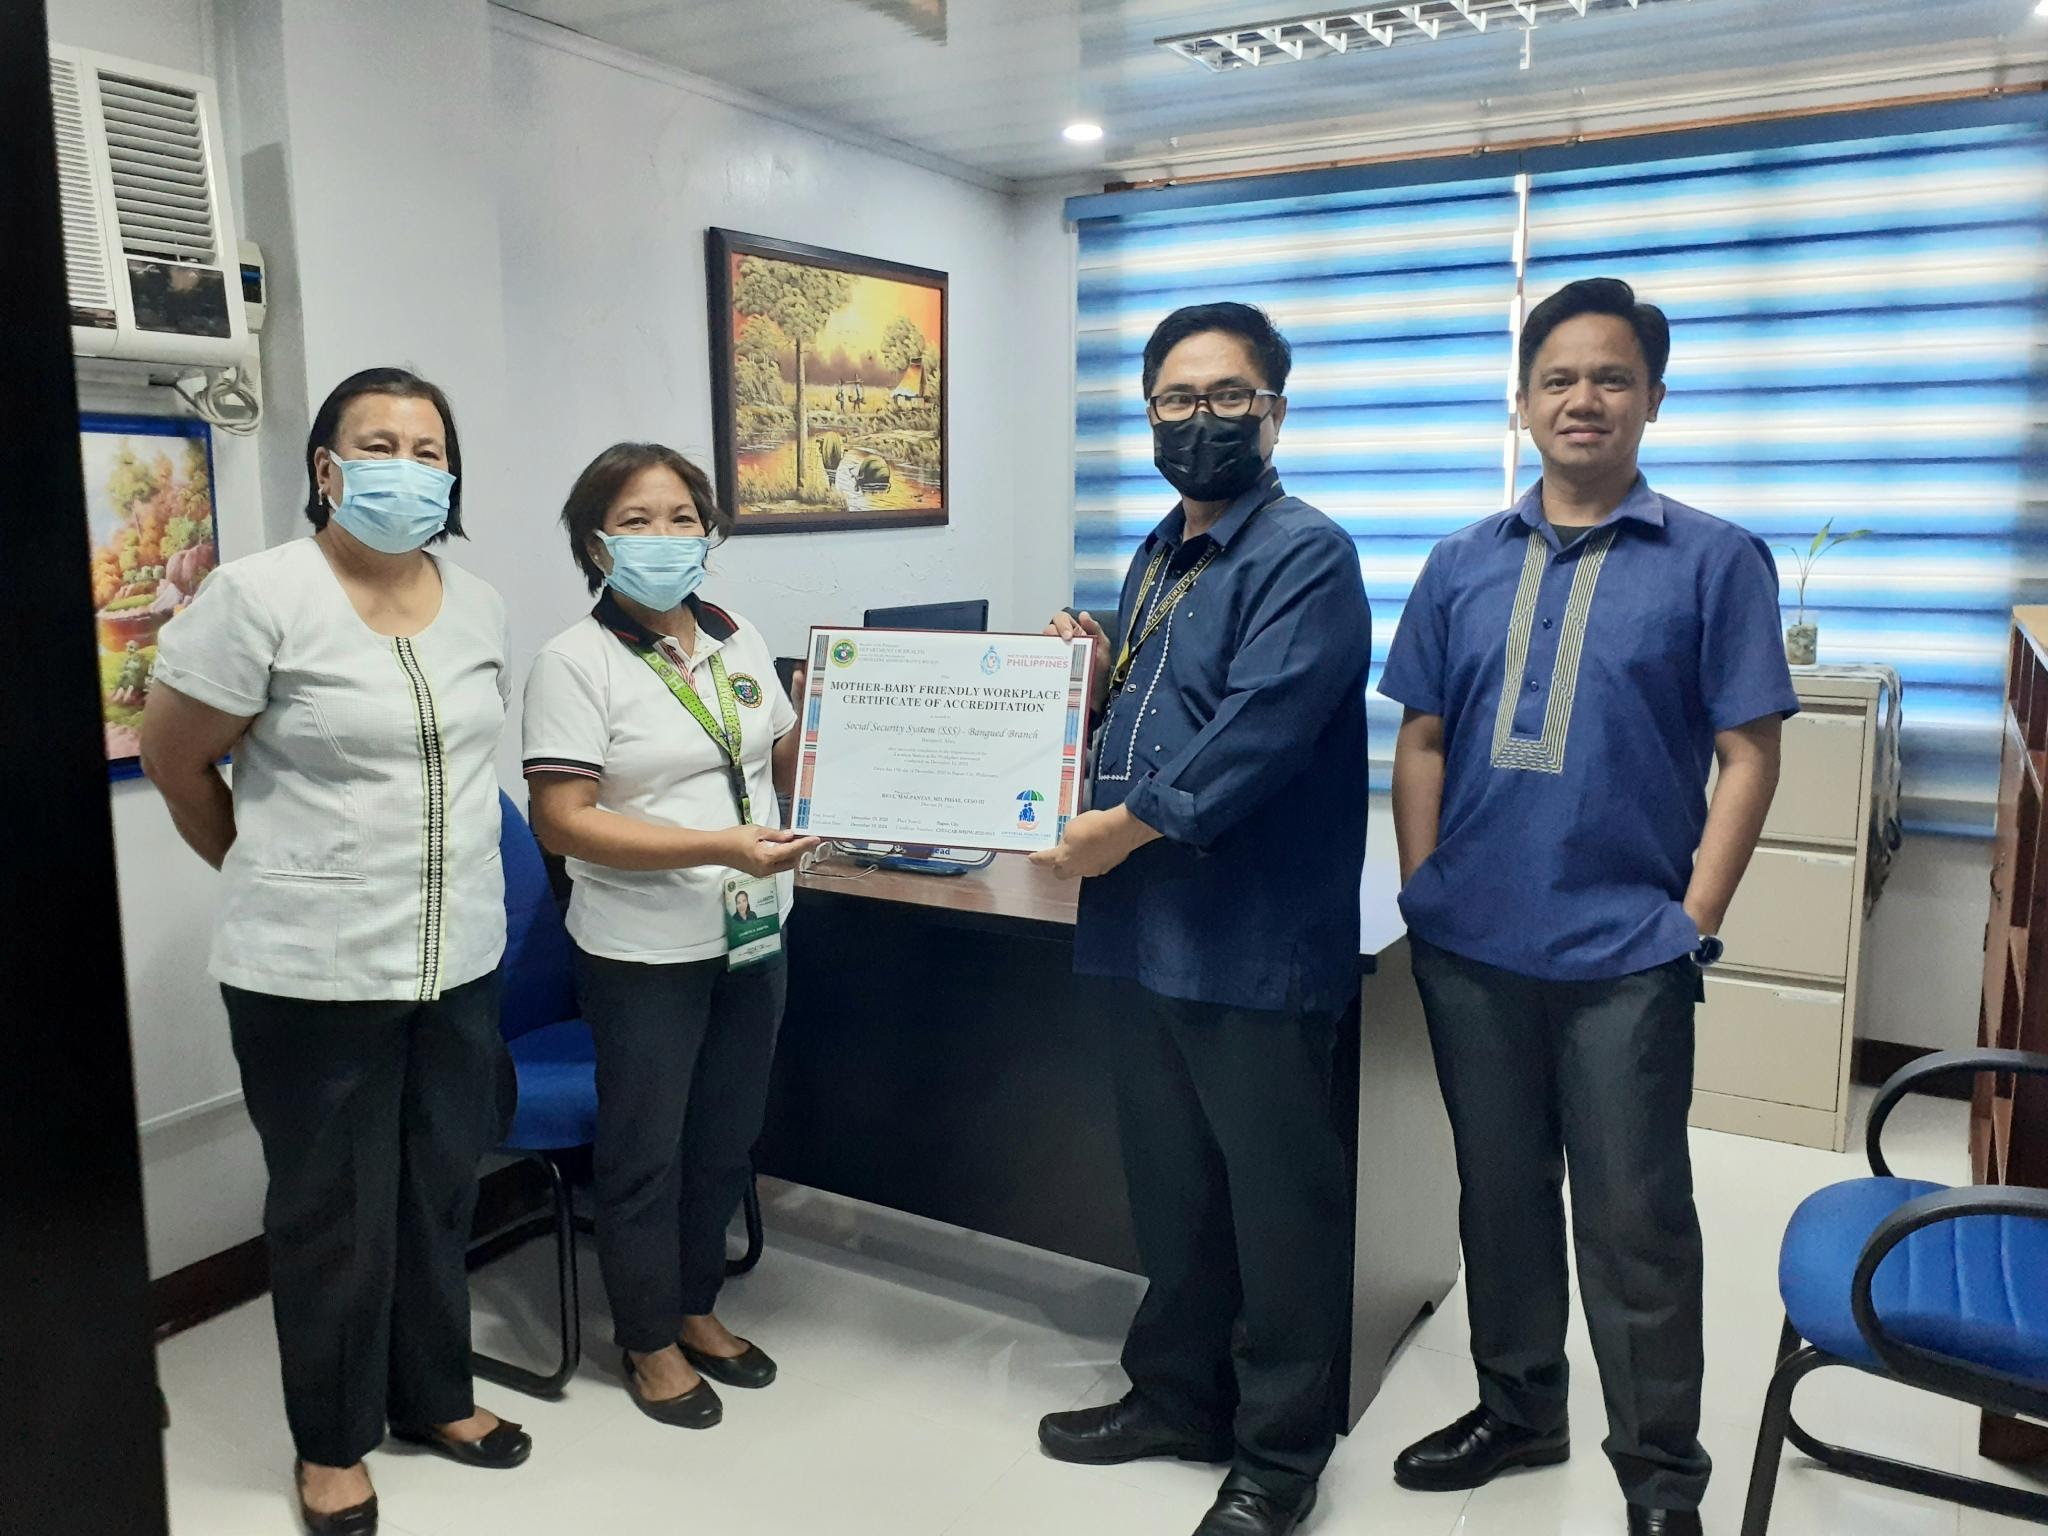 SSS Bangued receives accreditation as mother-baby friendly workplace